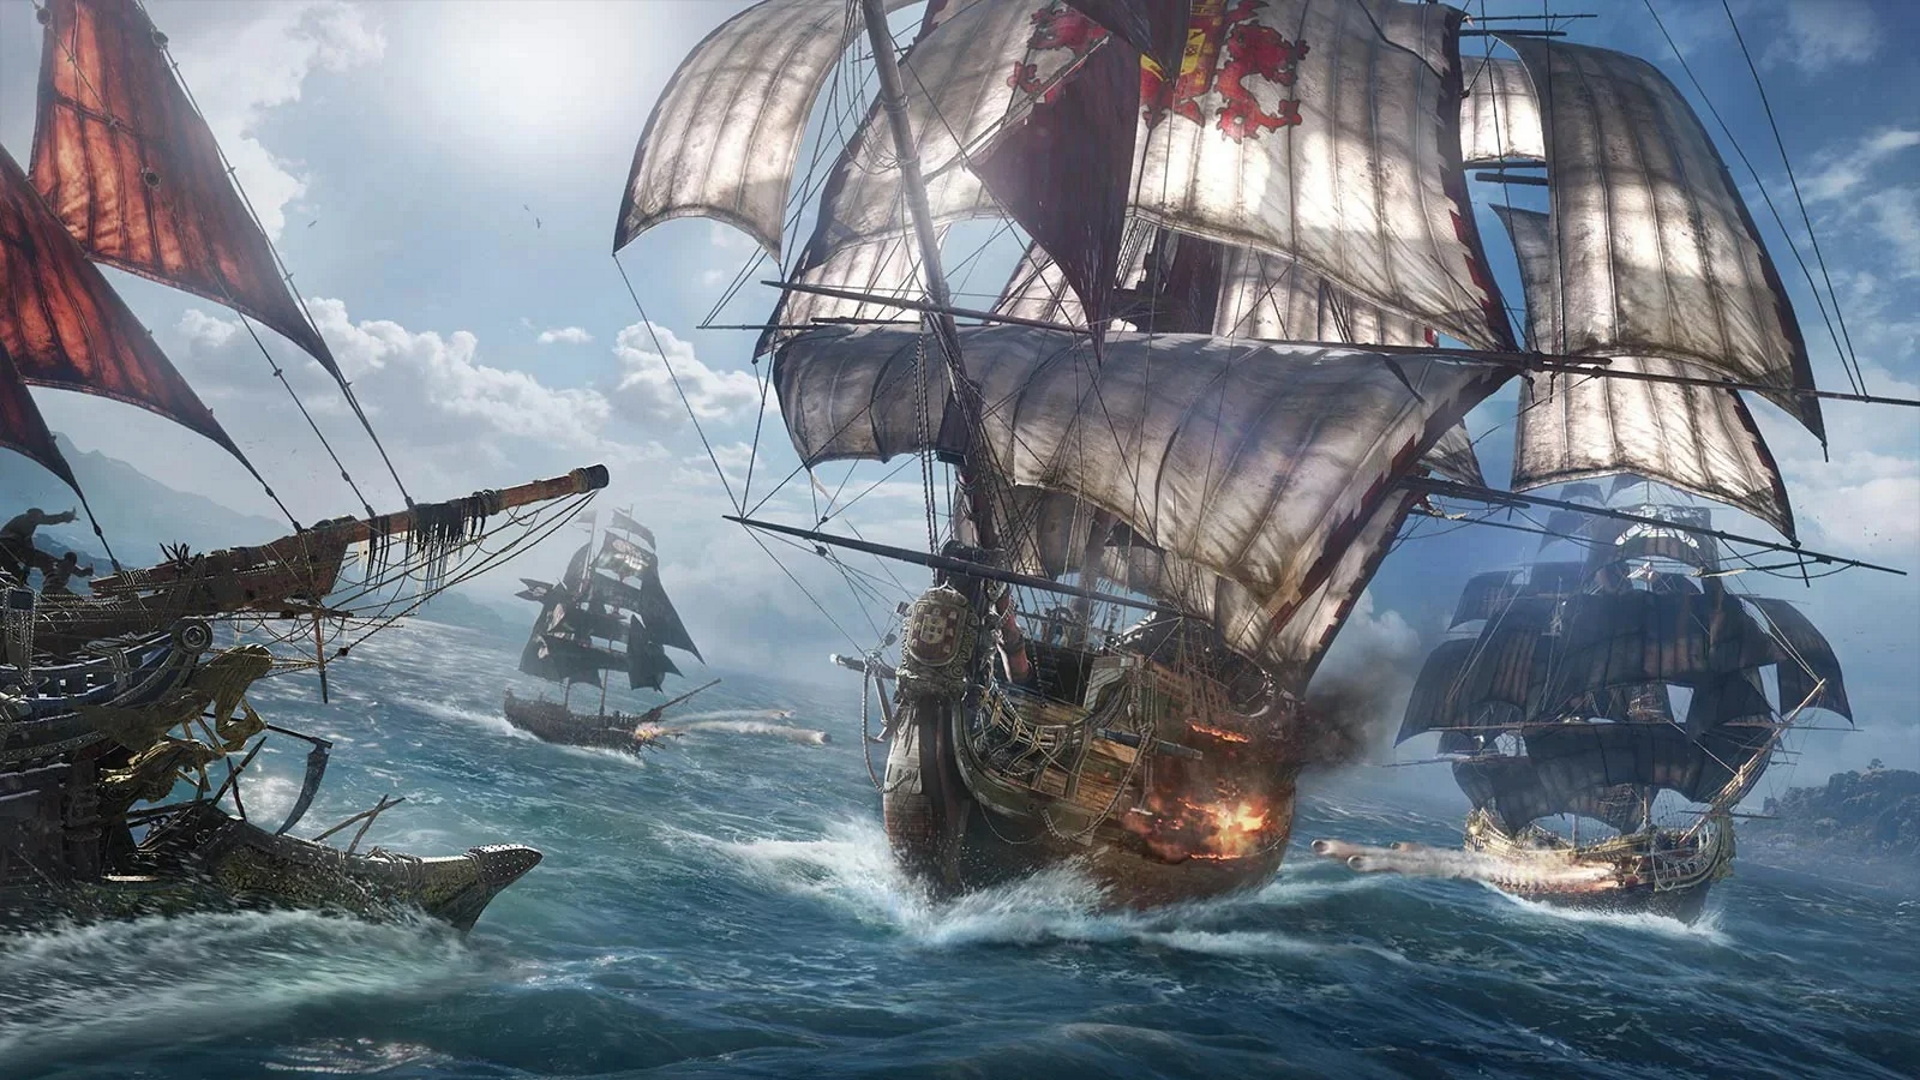 Skull & Bones is delayed, reportedly over concerns of shallow gameplay